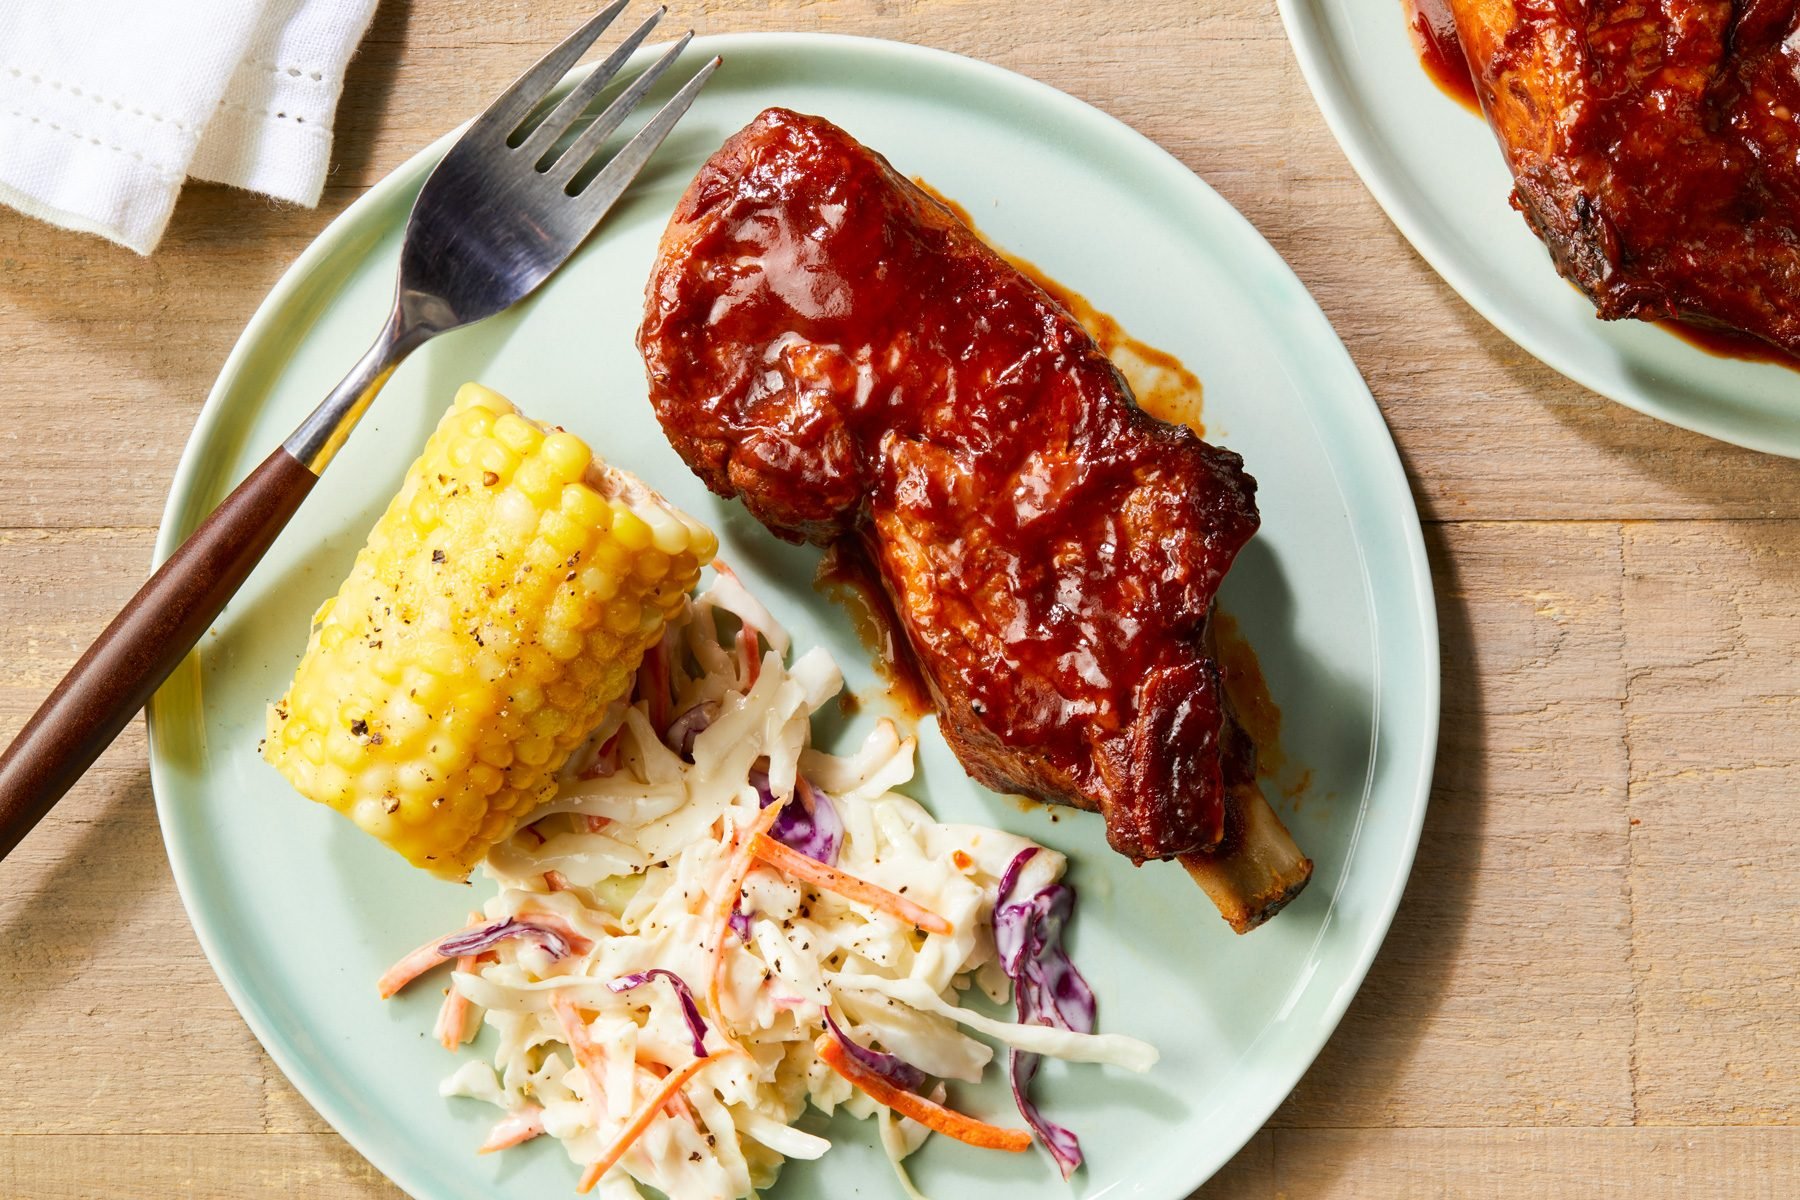 A plate of country Ribs in The Oven served with corn on the cob and a salad